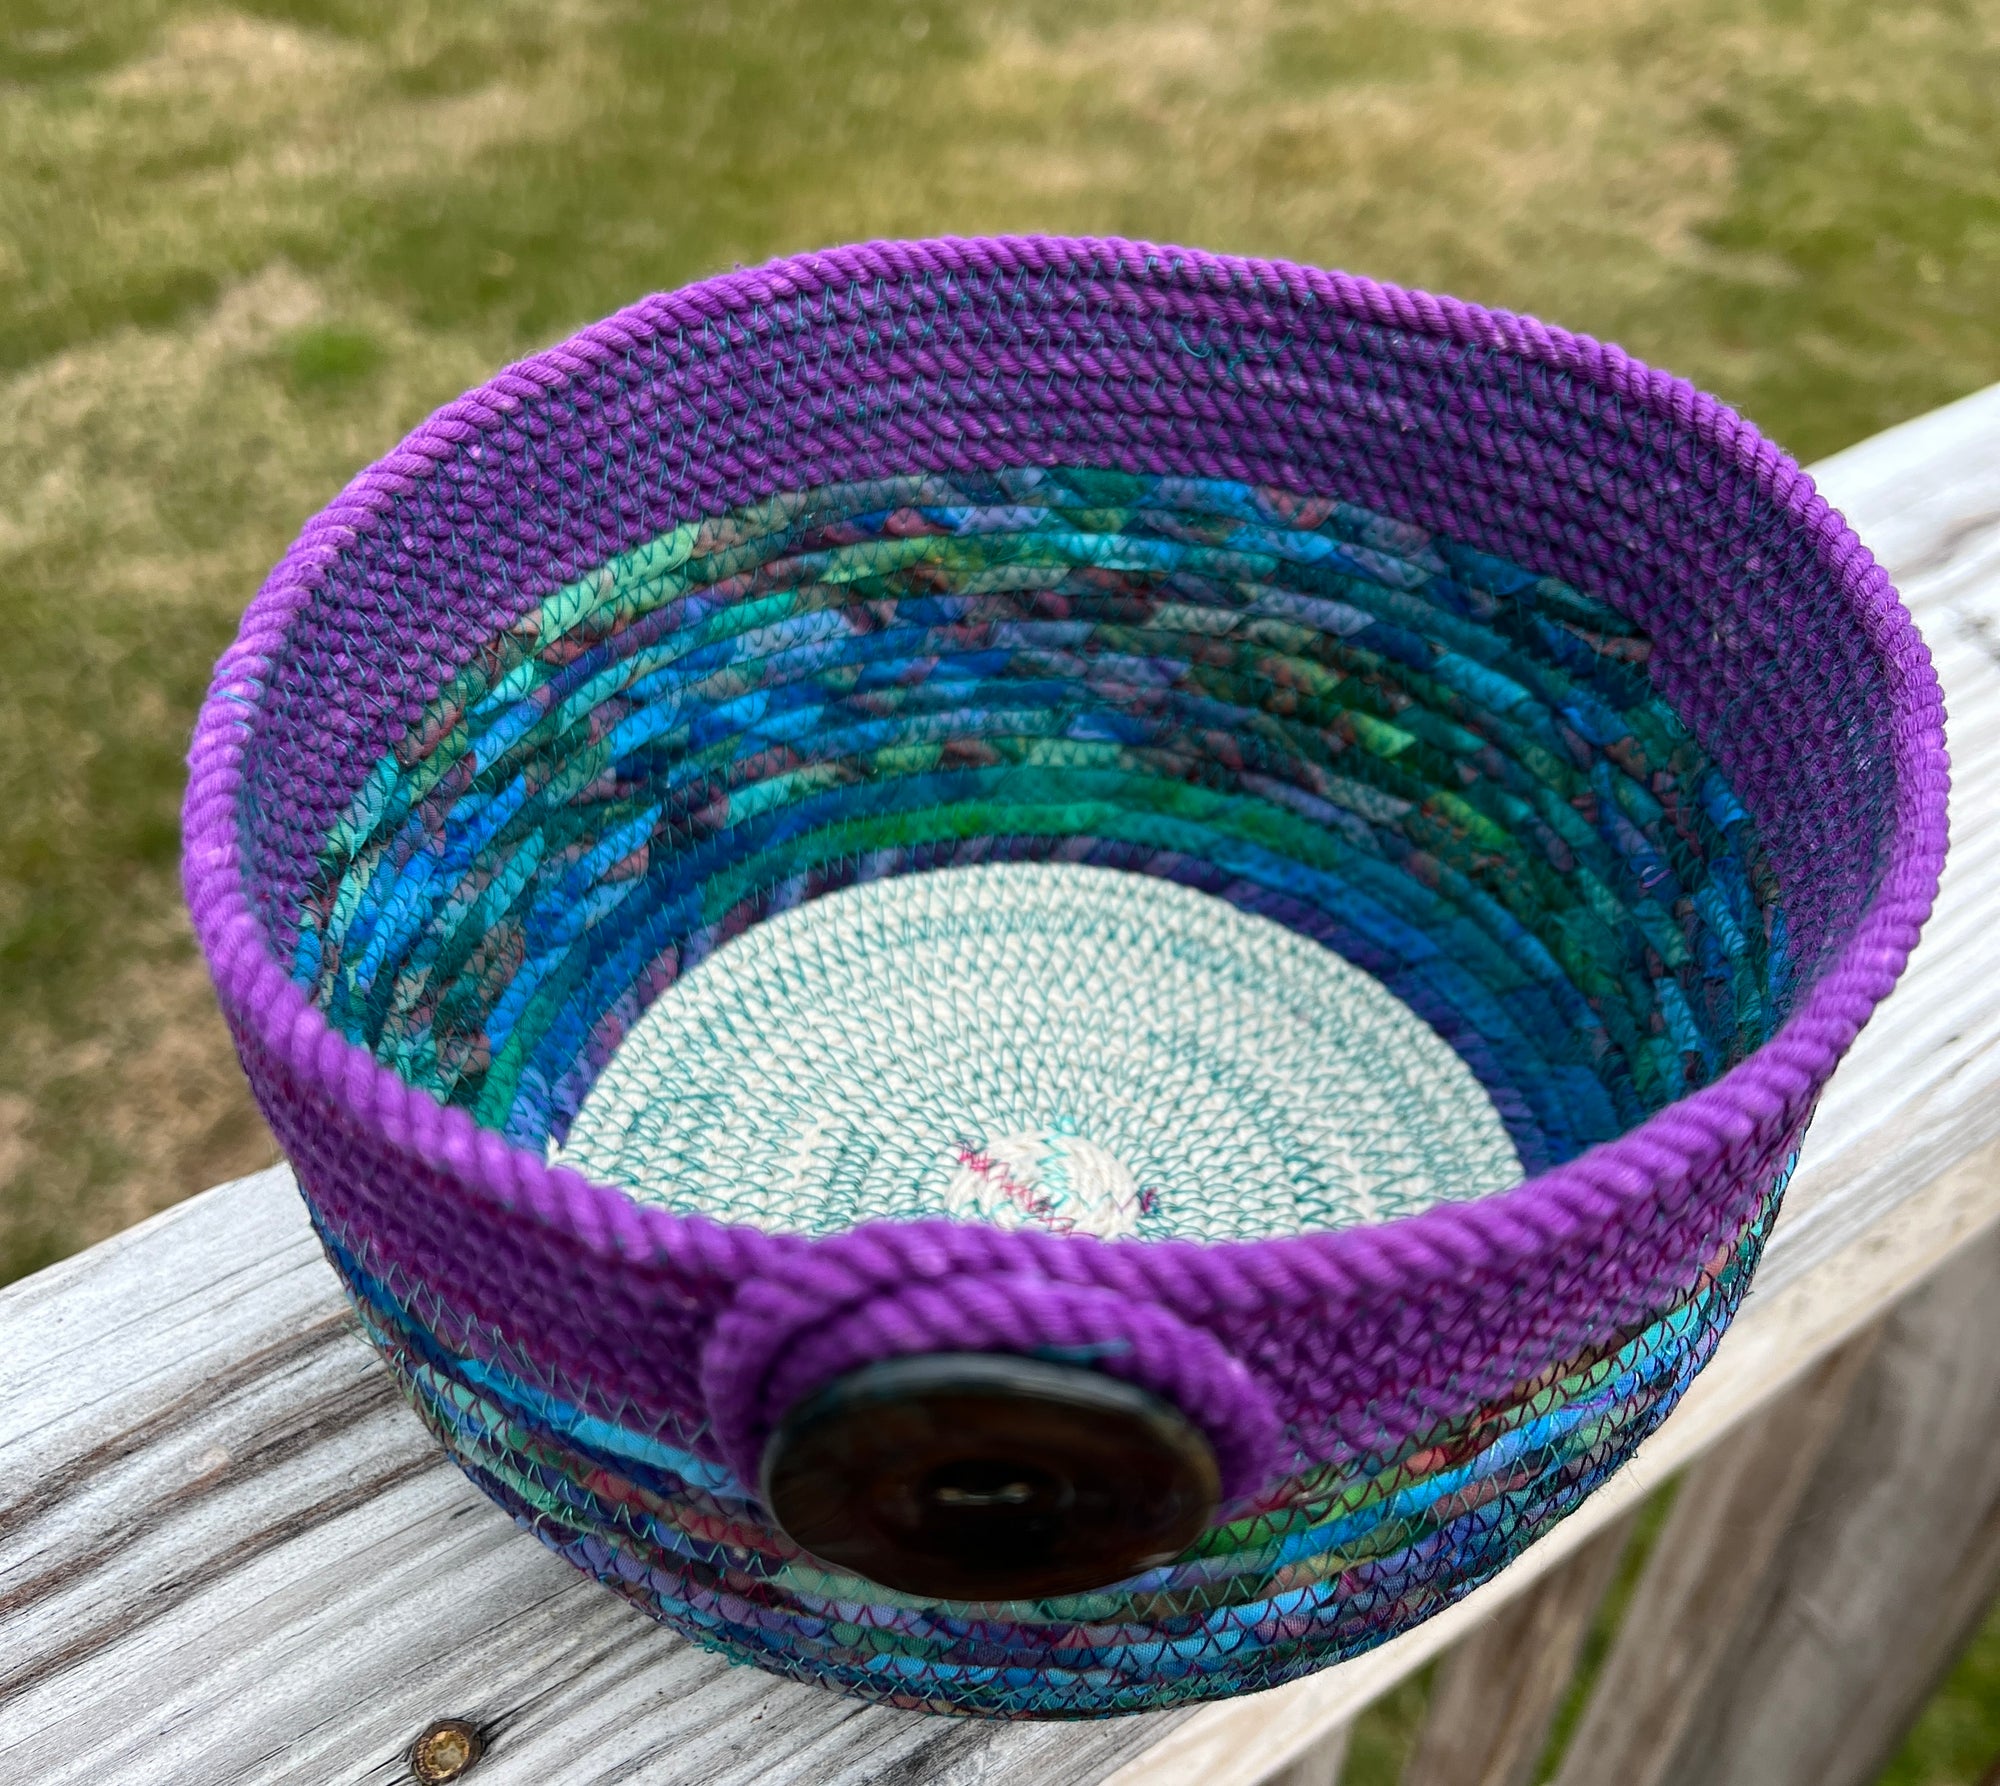 6" Coiled Rope Planter Pot in Purple and Blues